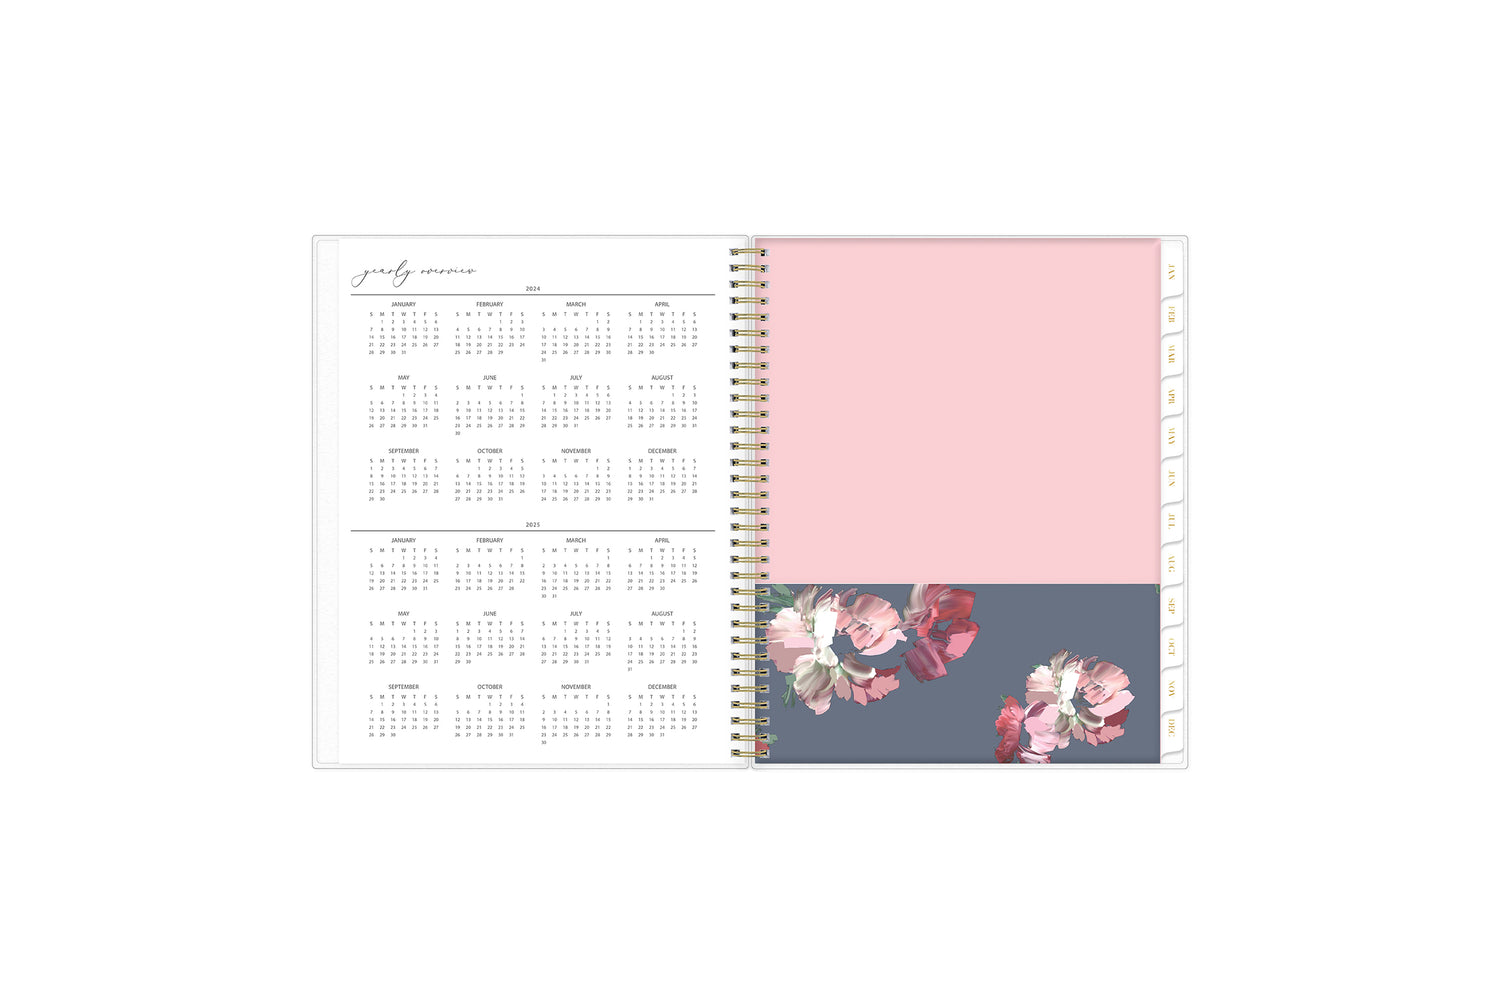 Life Note It collection by Blue Sky for January 2024 - December 2024 features a yearly overview, paper pocket, and ruler to help you stay organized throughout the new year in a 8.5x11 planner